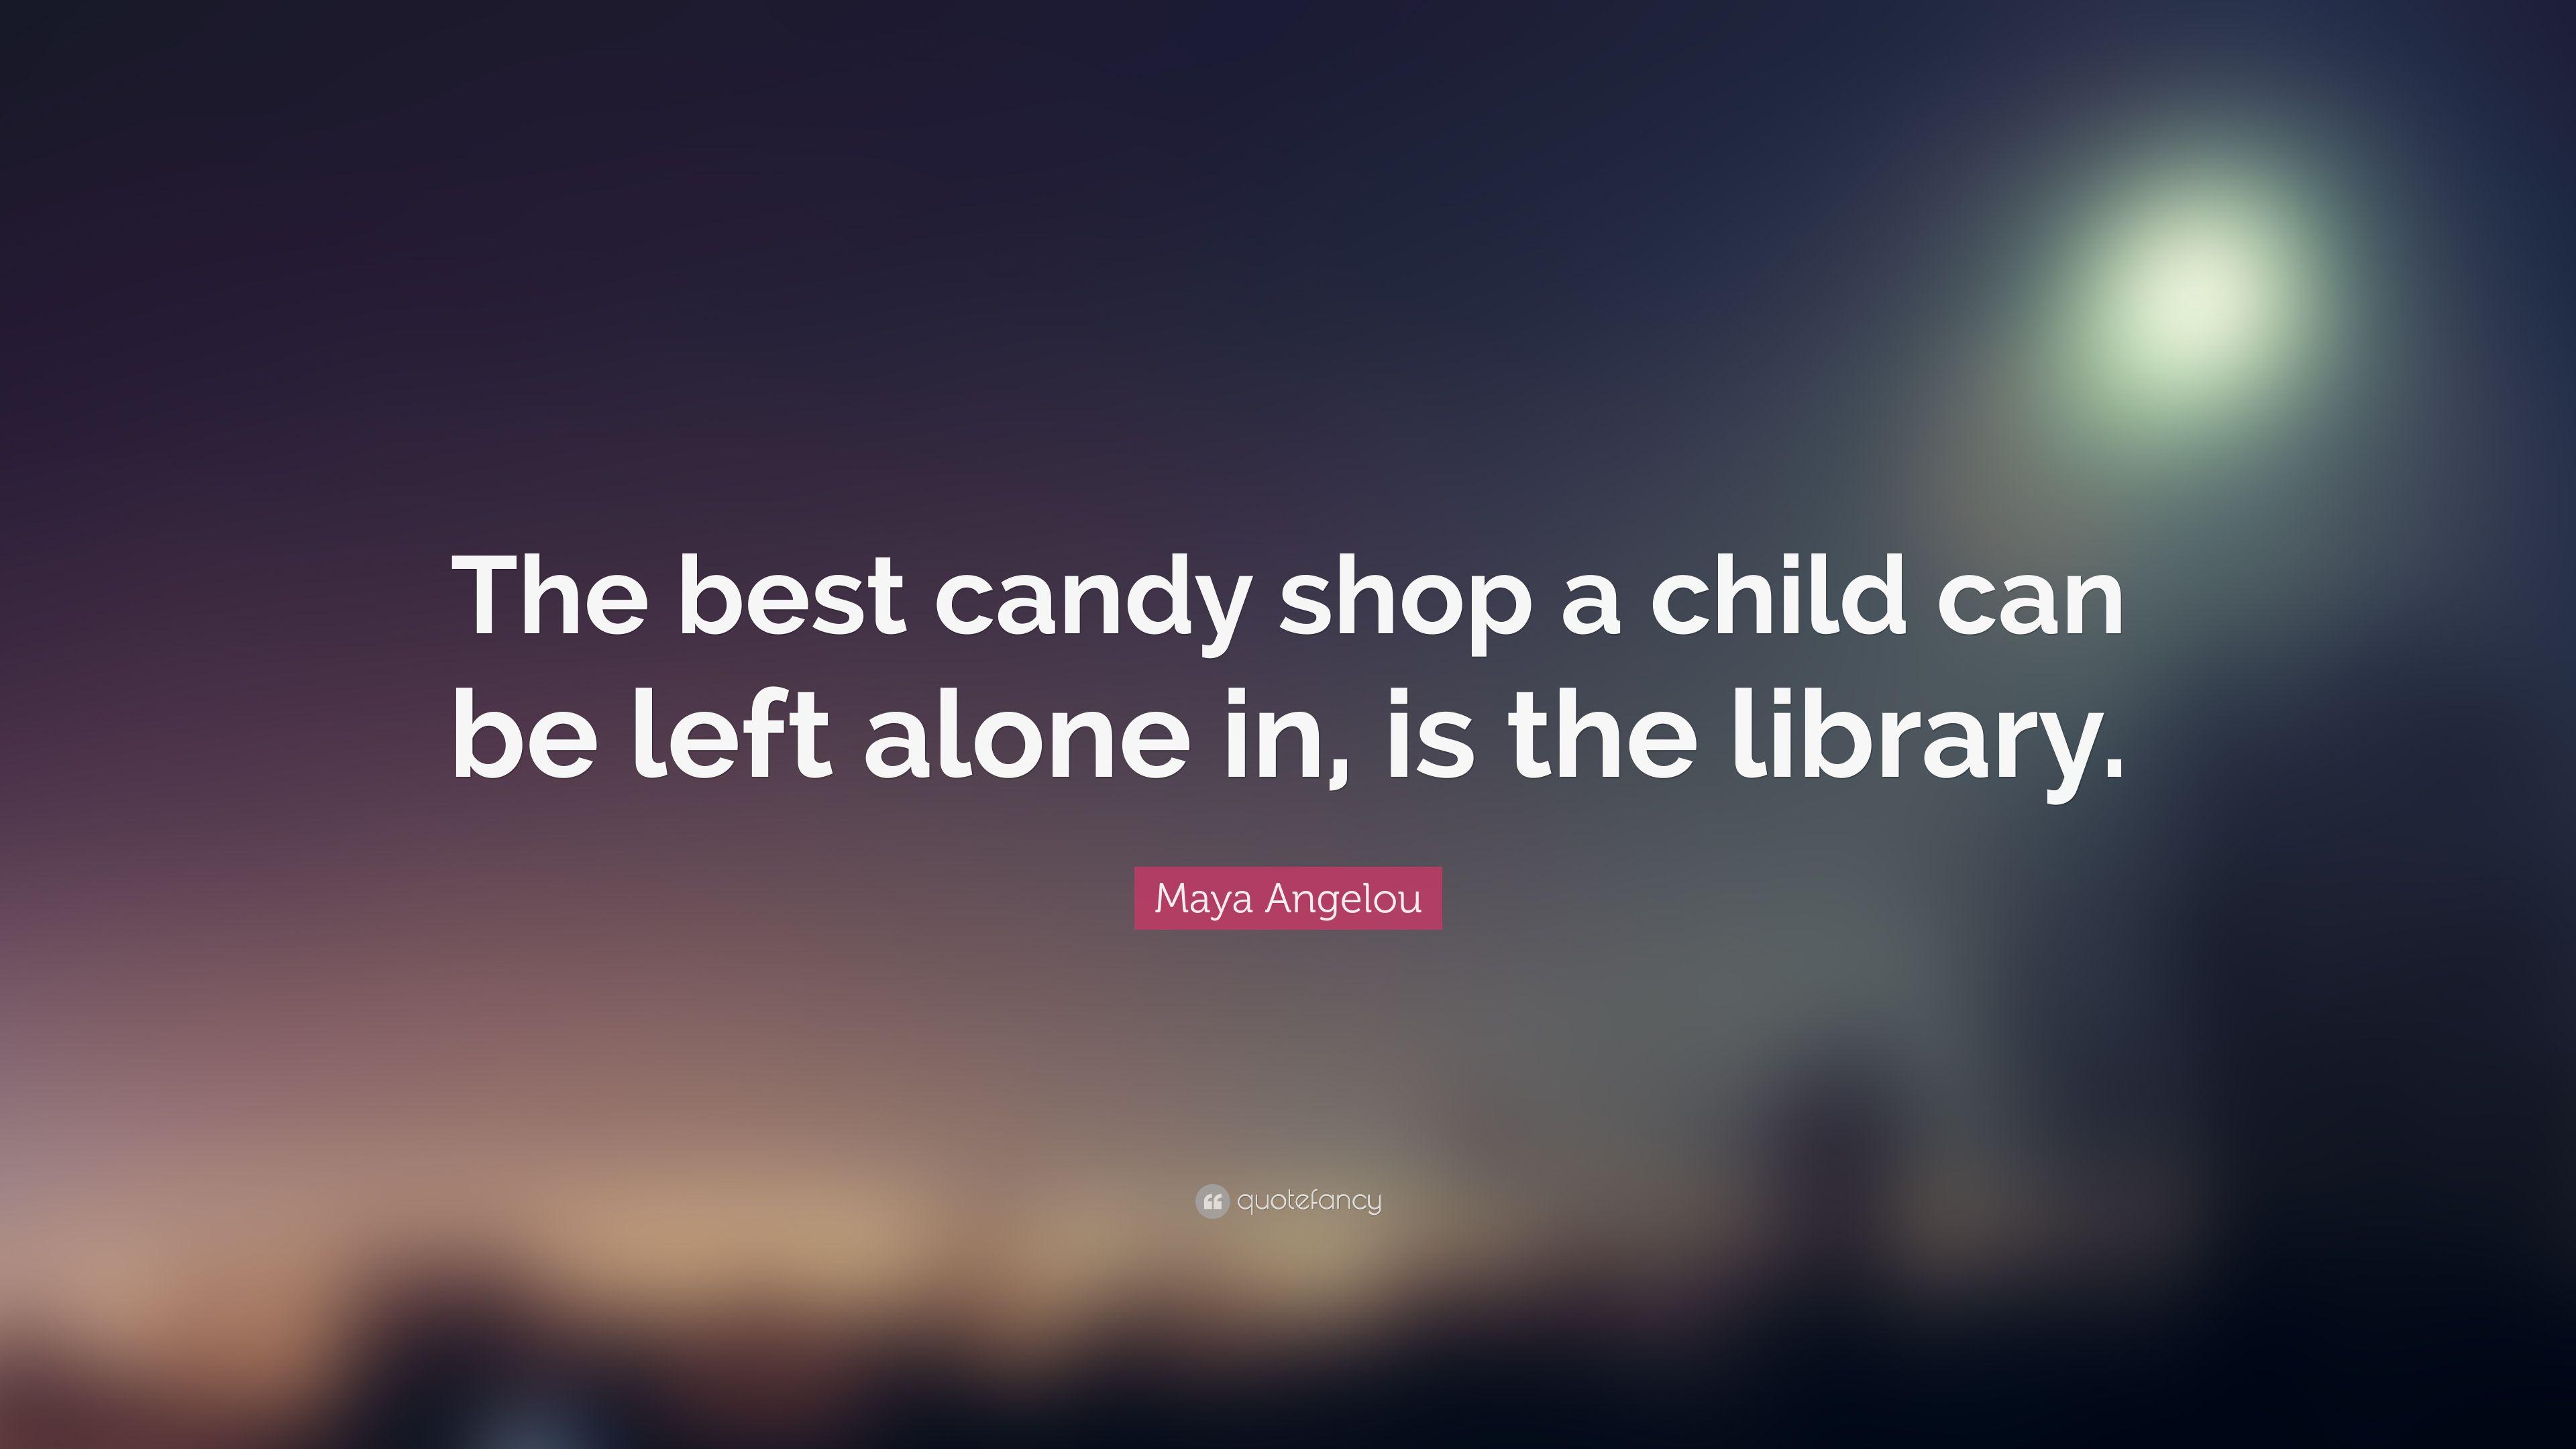 Maya Angelou Quote: “The best candy shop a child can be left alone